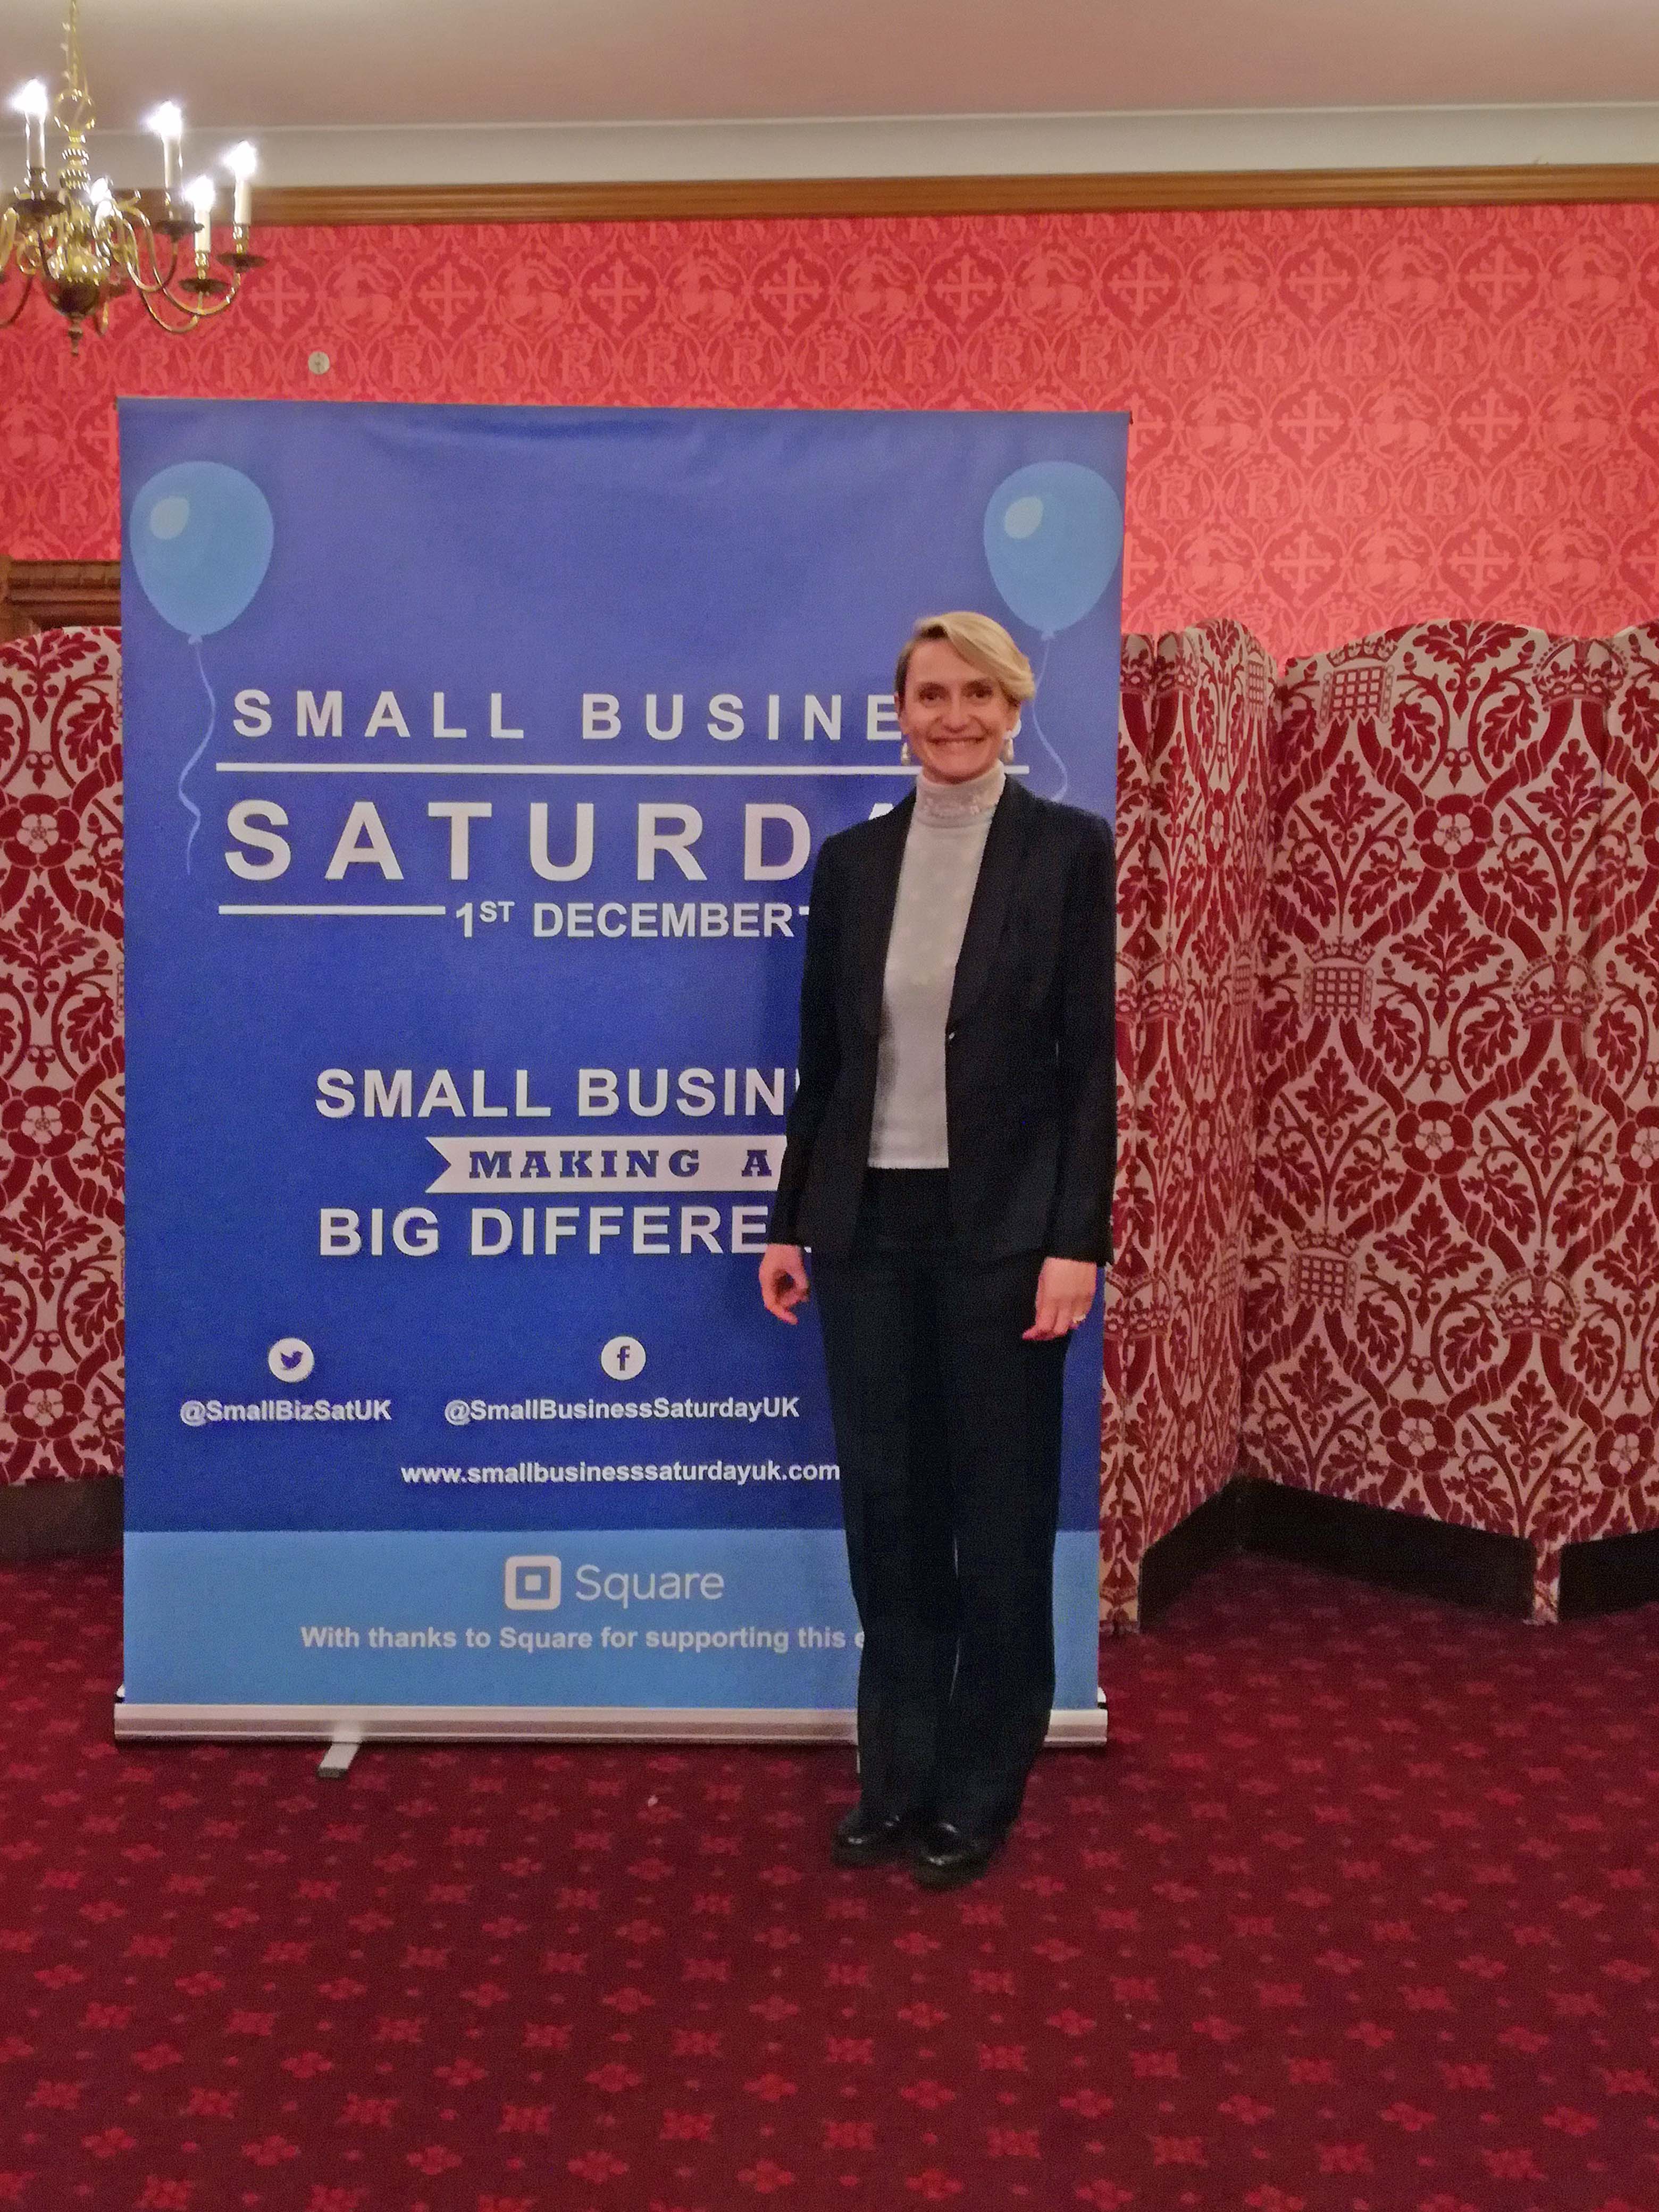 Lady smartly dressed stood in front of event poster